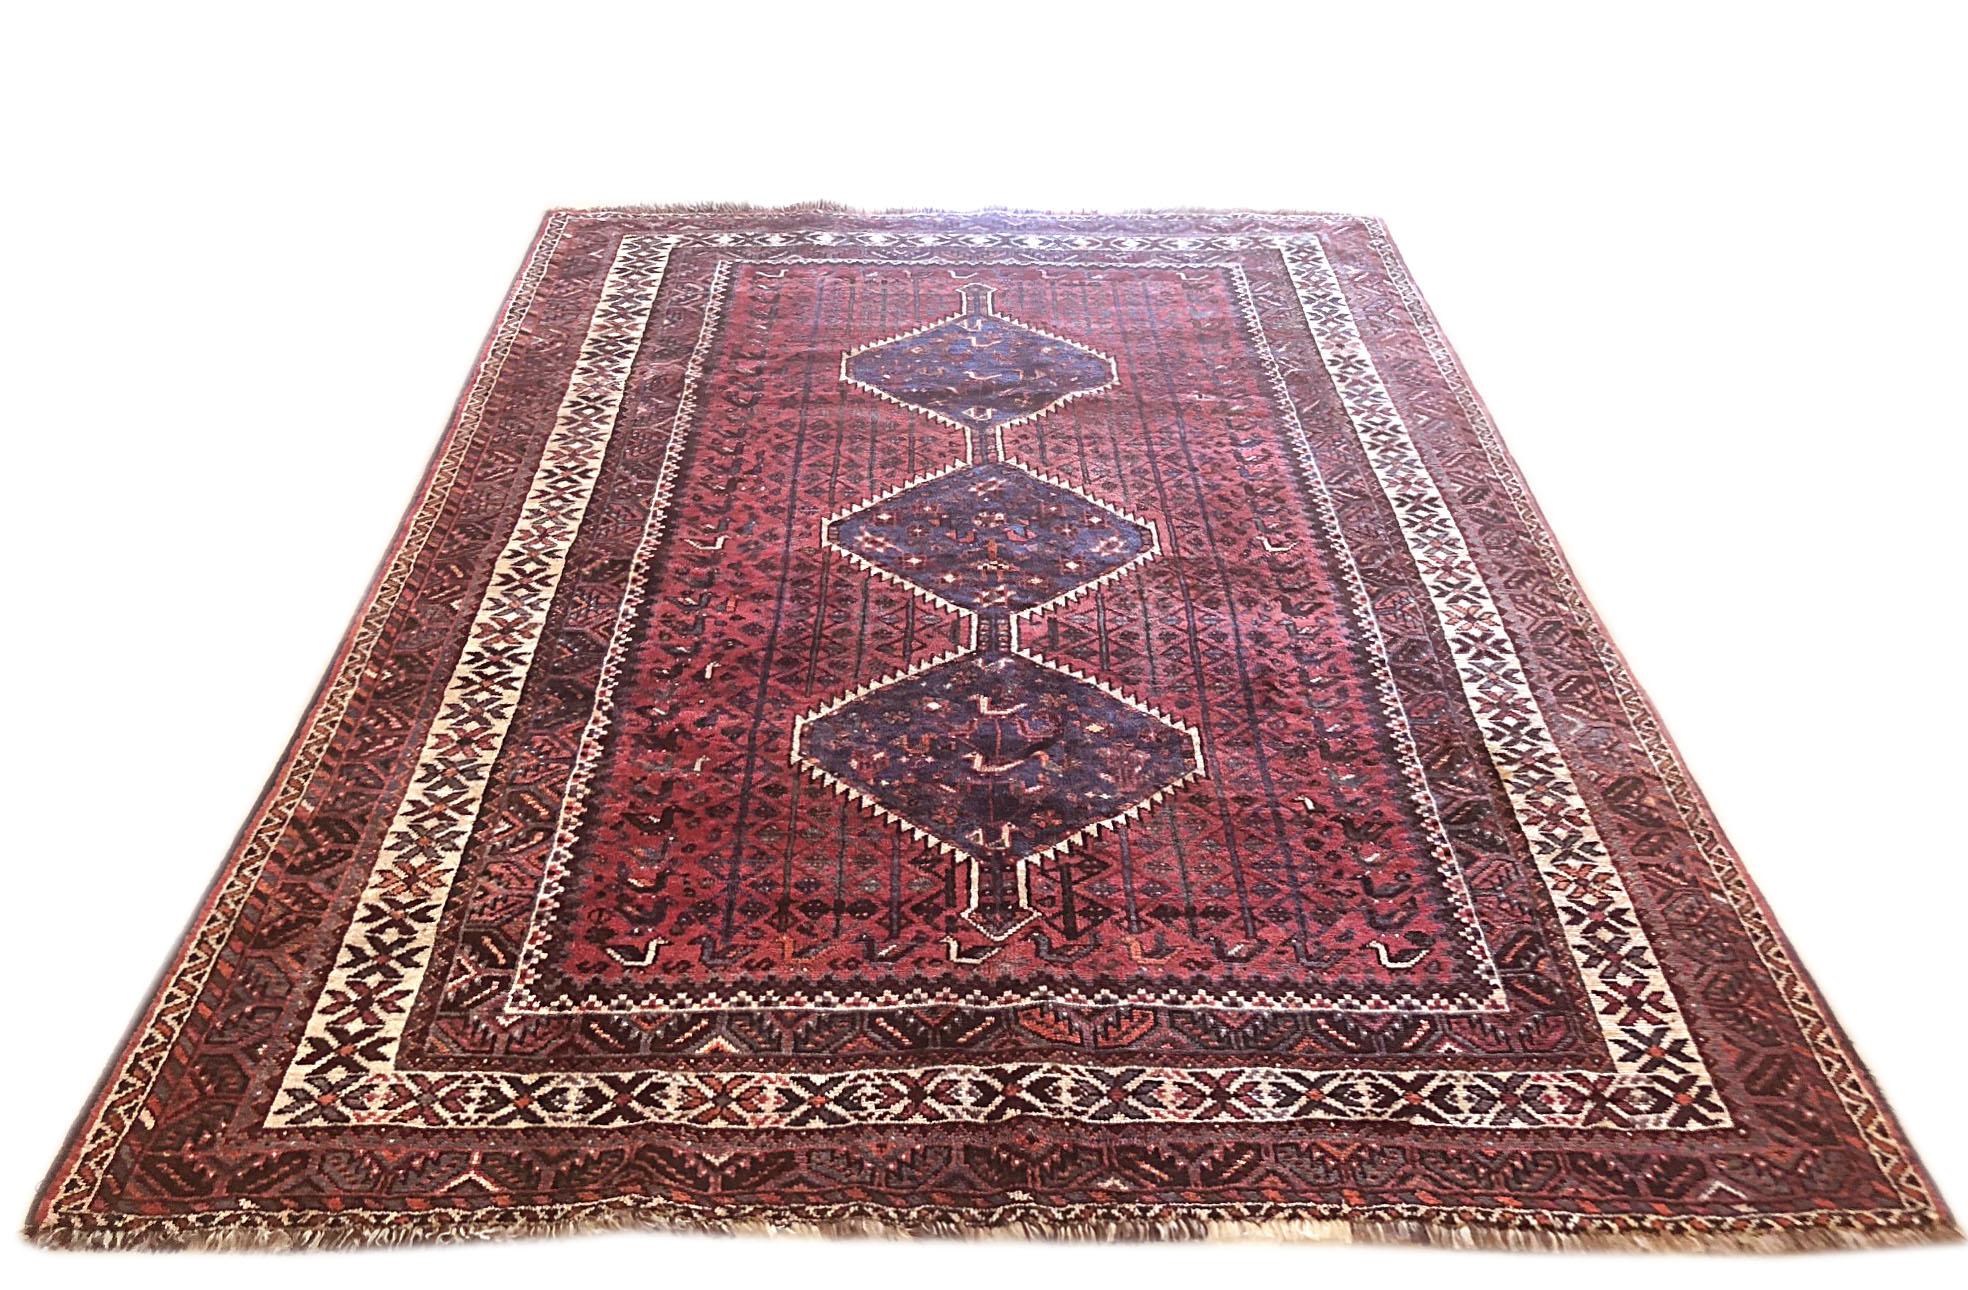 This rug is an authentic rug from Iran, Shiraz. The pile and foundation are wool. The base color is red and cream and multi. The design is geometric with repeated medallion. This piece is a great choice for both traditional and transitional home